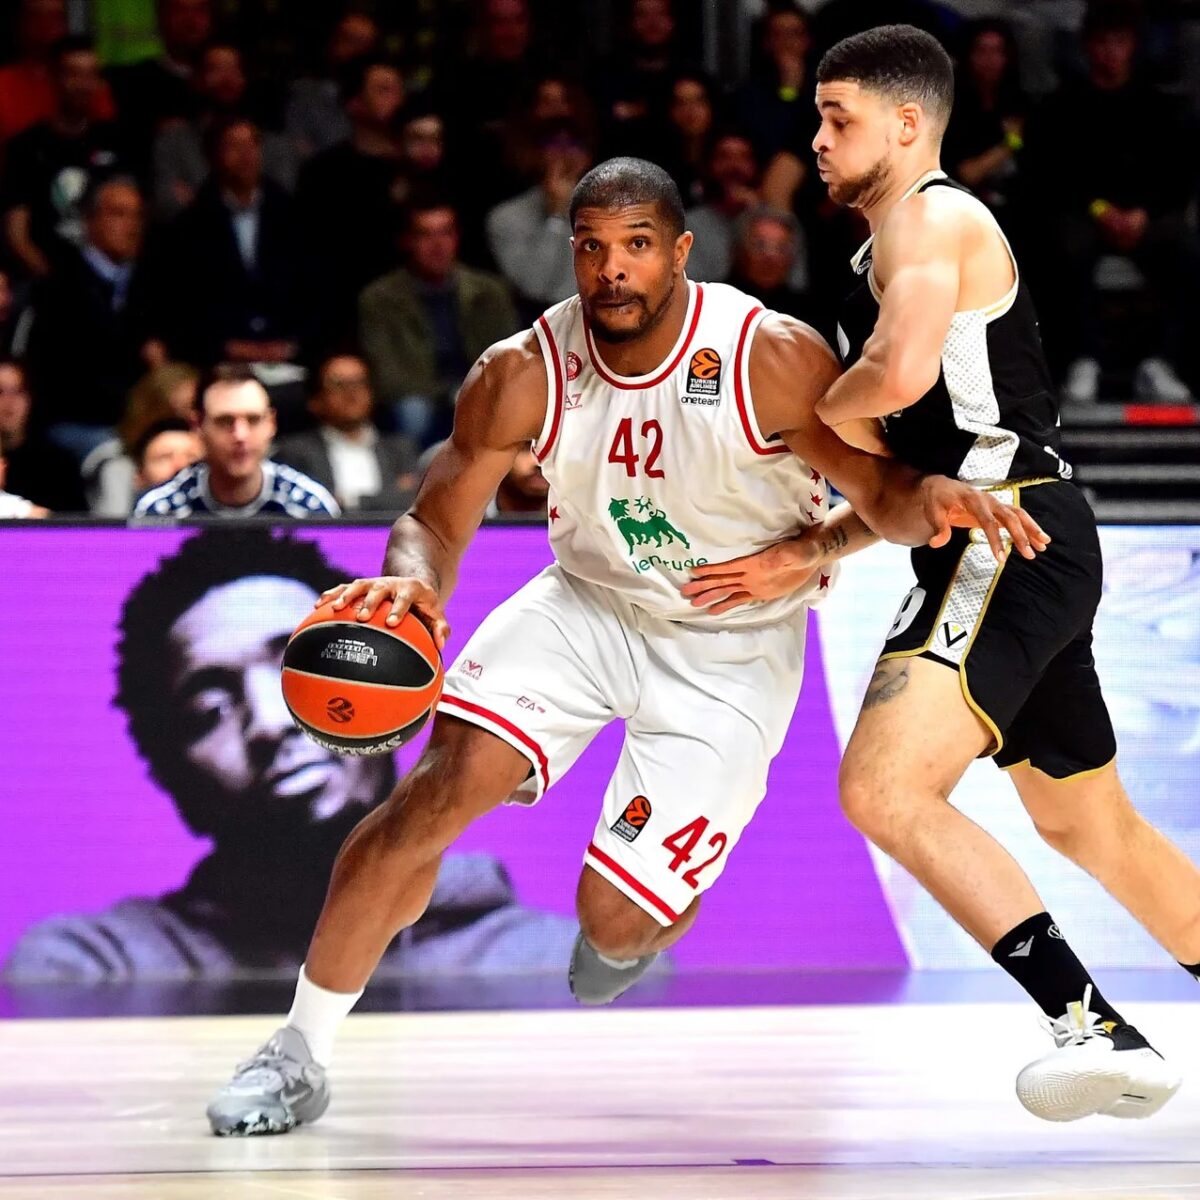 Kyle Hines is back and Nikola Mirotic has arrived but will there be enough for Ettore Messina to bring Olimpia Milano to the Euroleague Basketball playoffs?